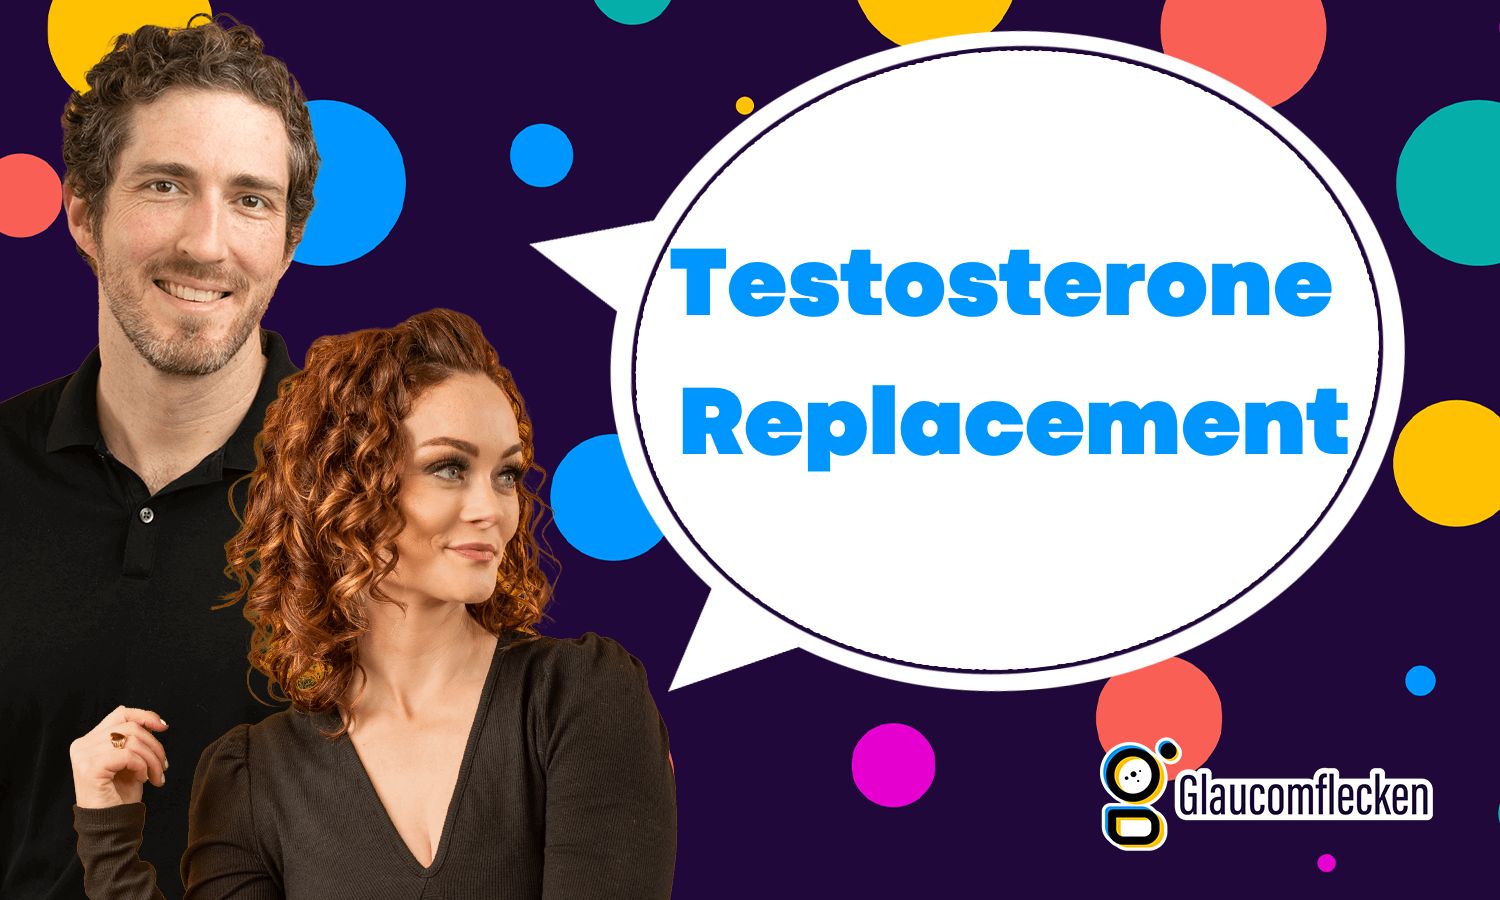 How Dr. Glaucomflecken Balanced Testosterone Replacement After Testicular Cancer